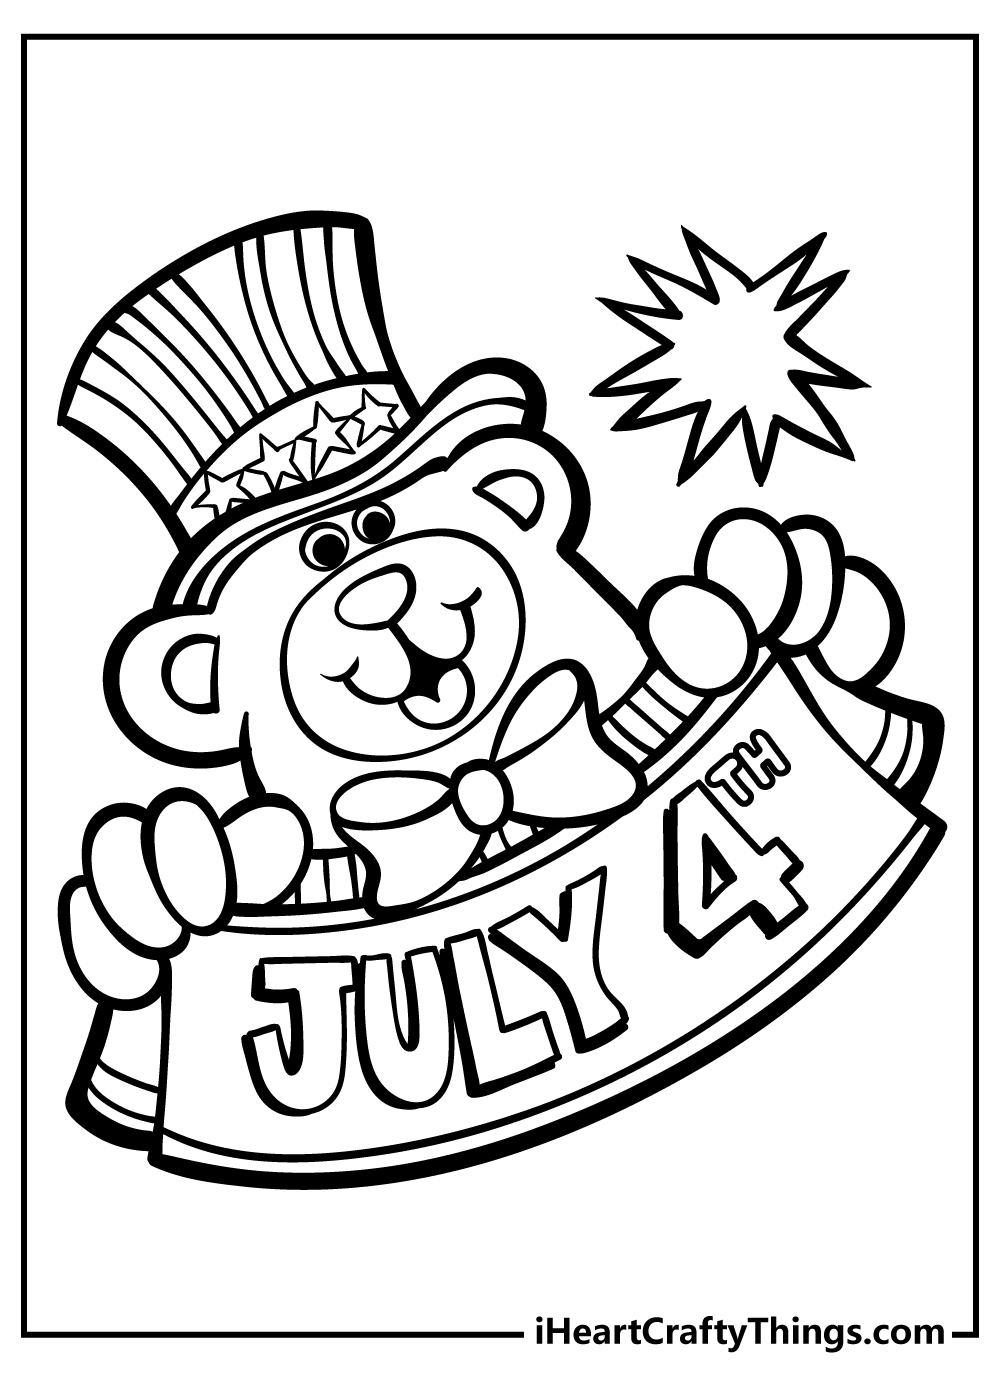 Th of july coloring pages free printables